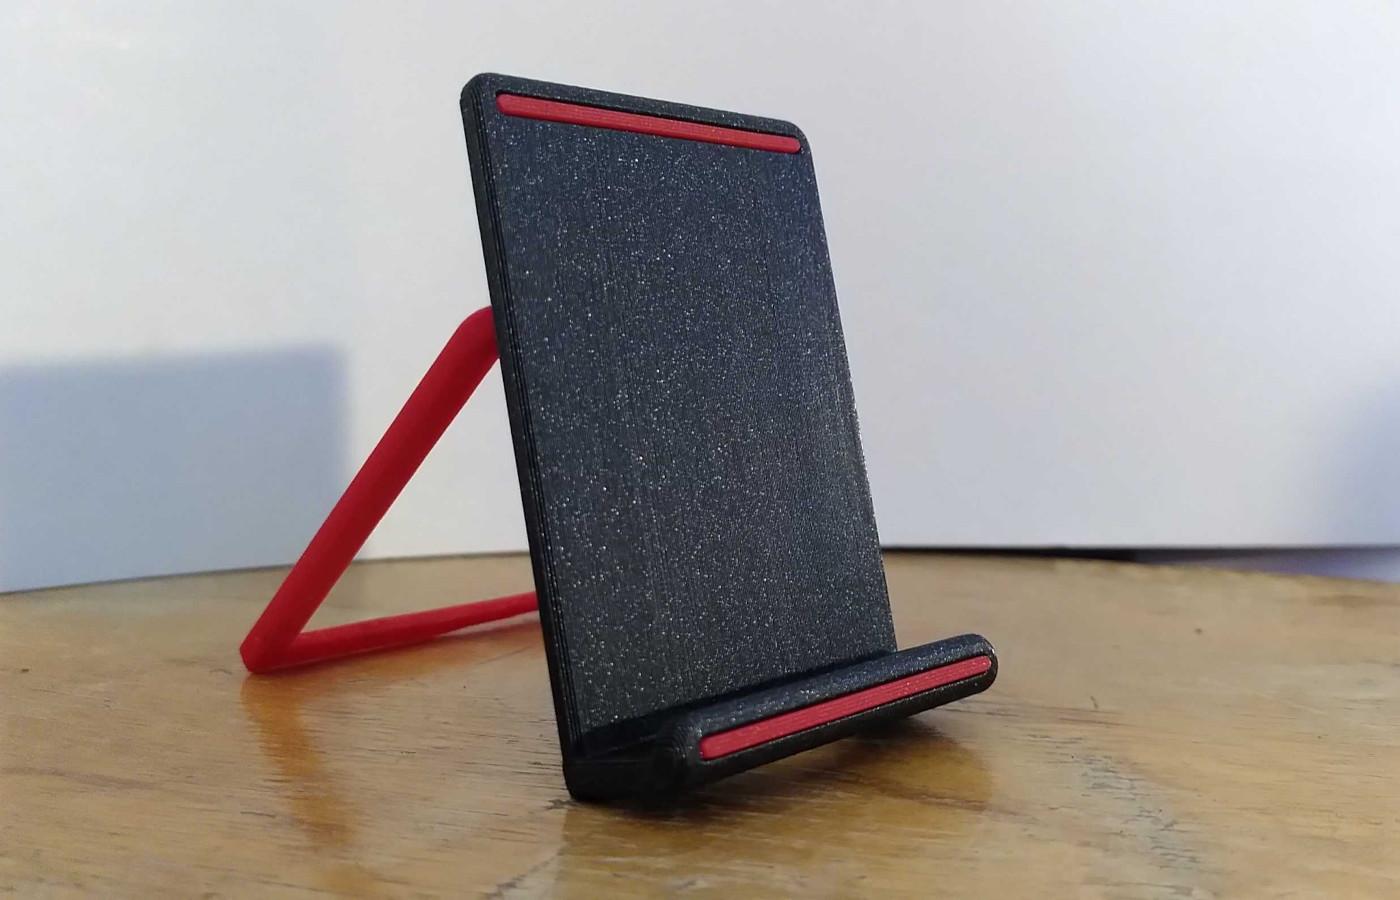 New adjustable phone stand model can now be printed :)